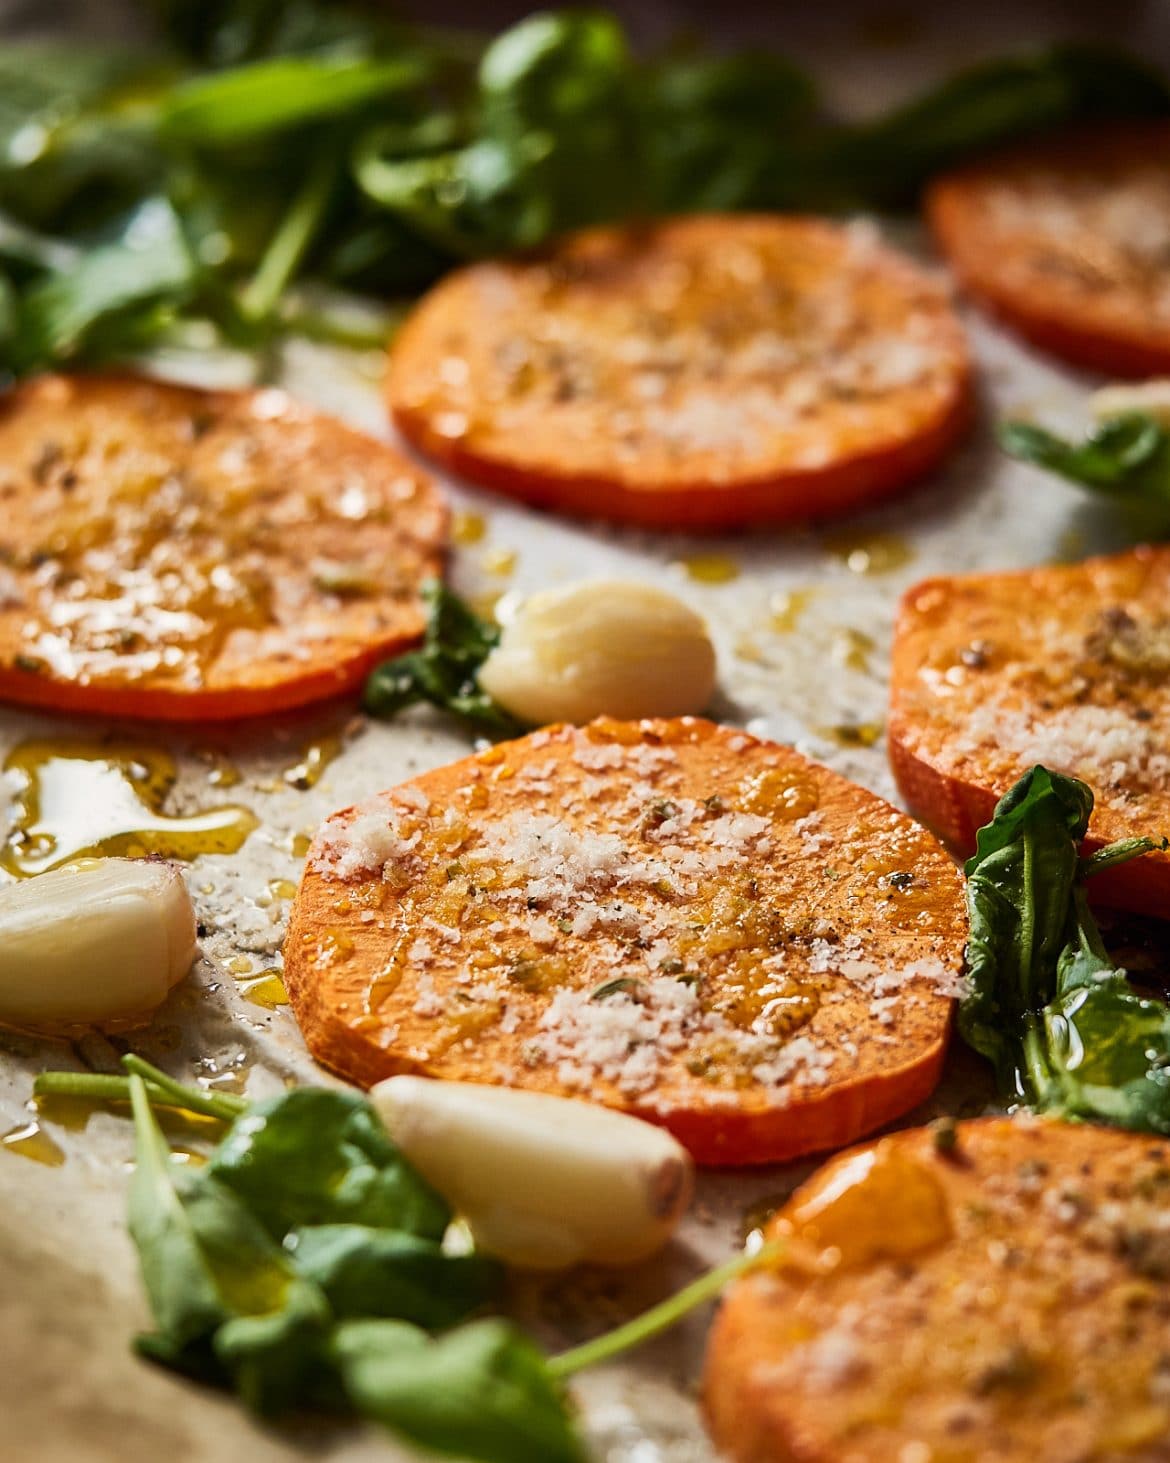 Baked butternut squash with parmesan